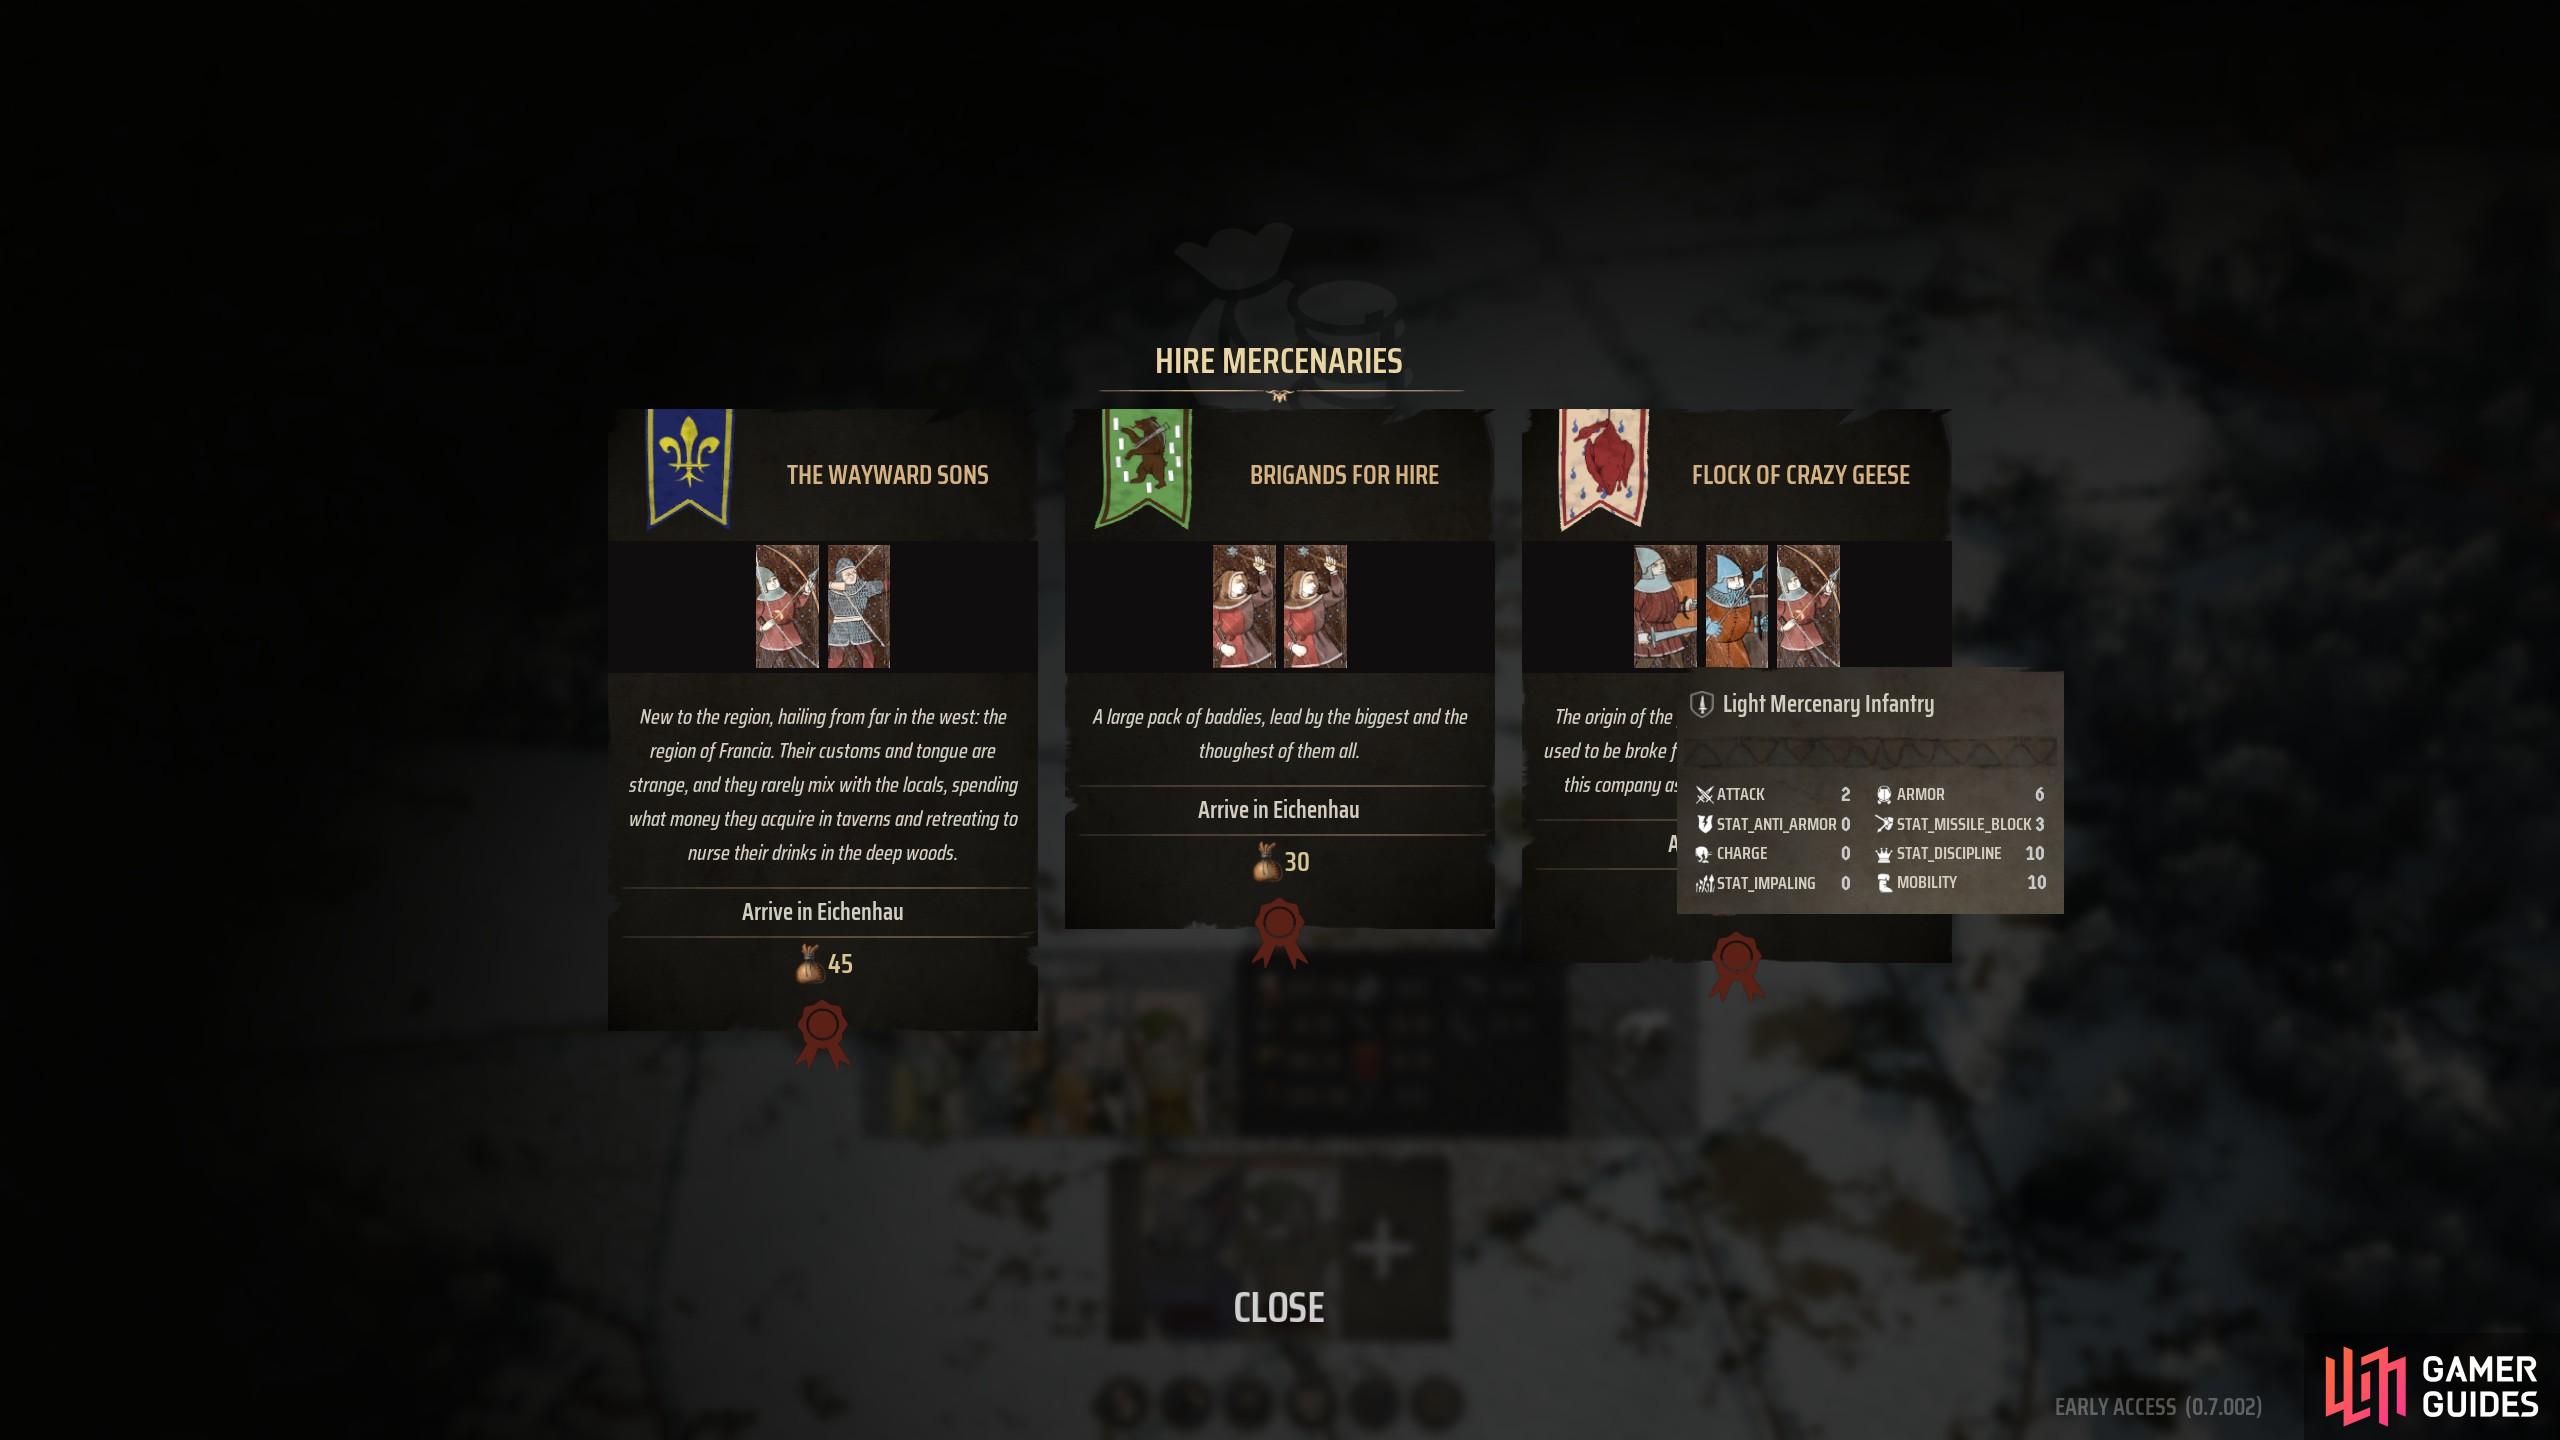 Open up the mercenary menu by going to the army panel and selecting the coin icon. This brings you to the hire mercenaries menu to recruit a sellsword army.